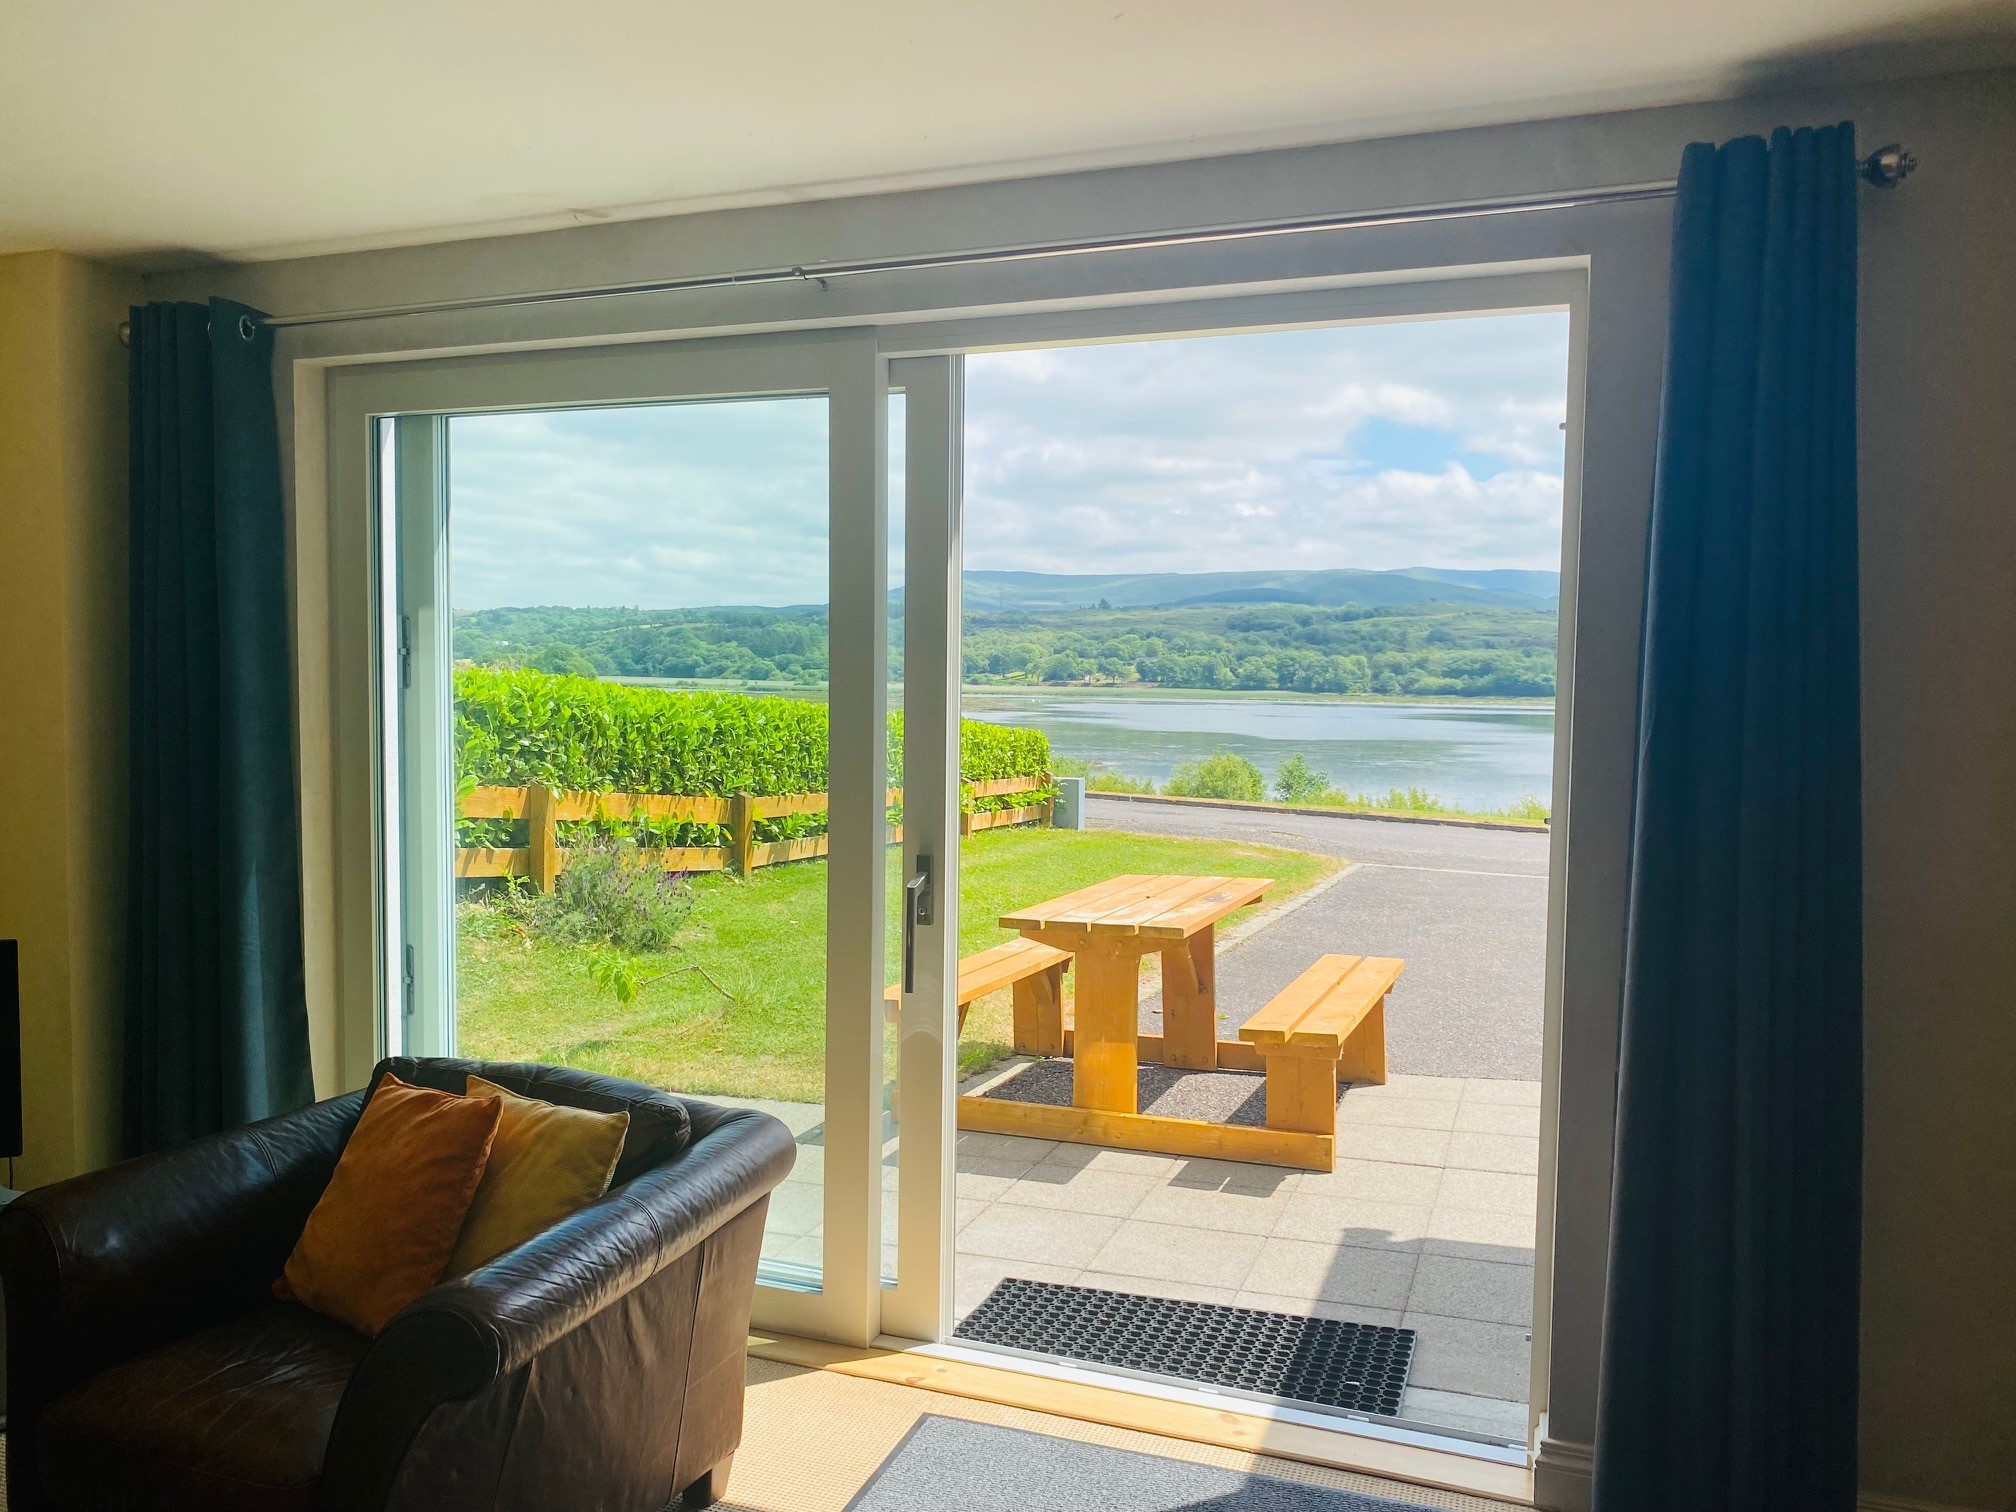 Property Image 1 - 3 bedroomed house with view of Kenmare Bay Estuary